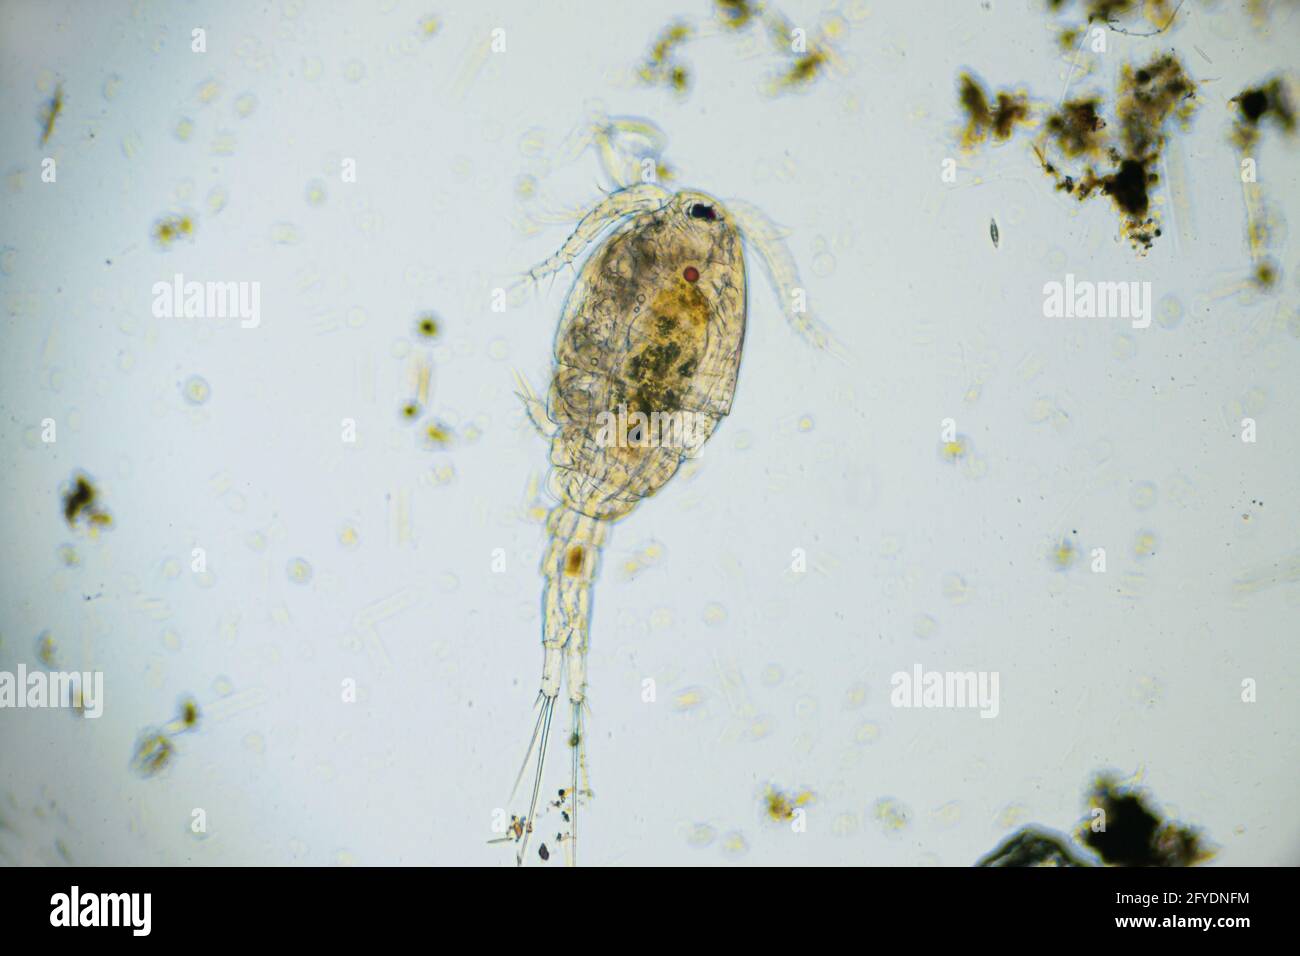 Copepod Cyclops is small crustacean found in freshwater pond. Zooplankton, micro crustacean under the light microscope. Magnification of 100 times, mi Stock Photo